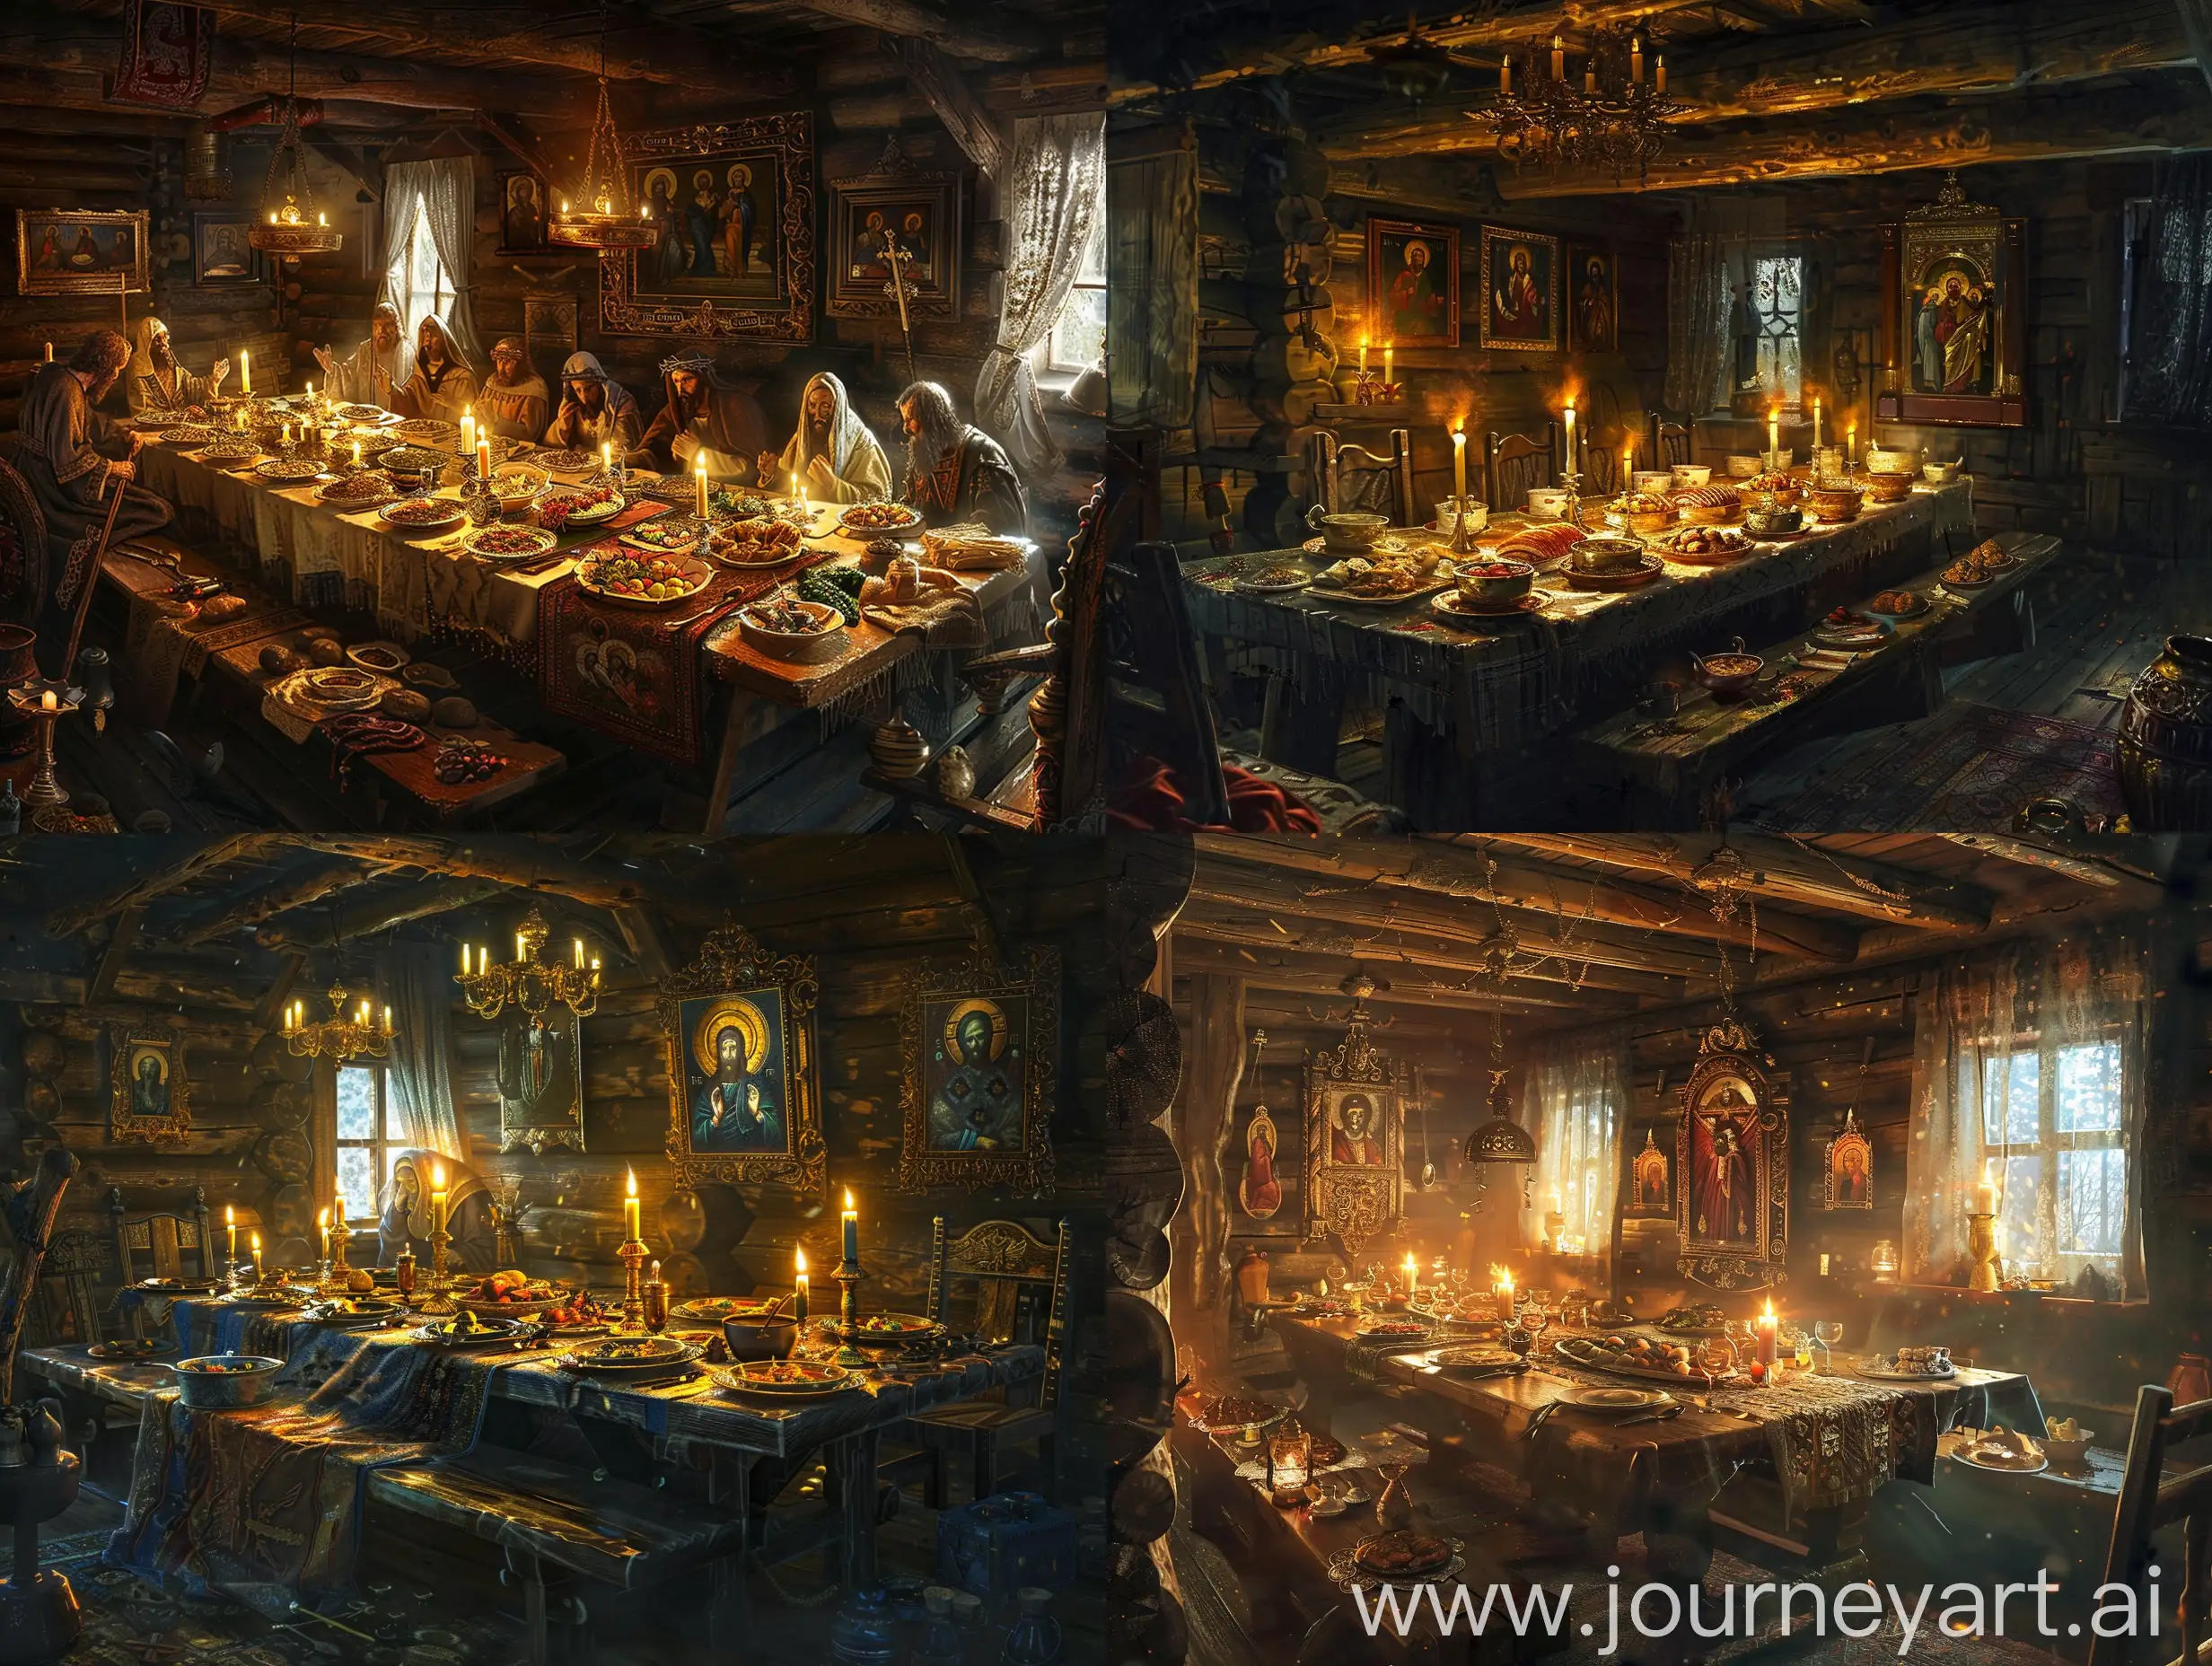 Last Supper in Dark Wooden Cabin: "Christ's Last Supper depicted in a dimly lit wooden cabin of medieval Russia, the table set with traditional Slavic dishes amidst icons and flickering oil lamps." based in Anatoly Timofeevich Fomenko e Gleb Vladimirovich Nosovsk books